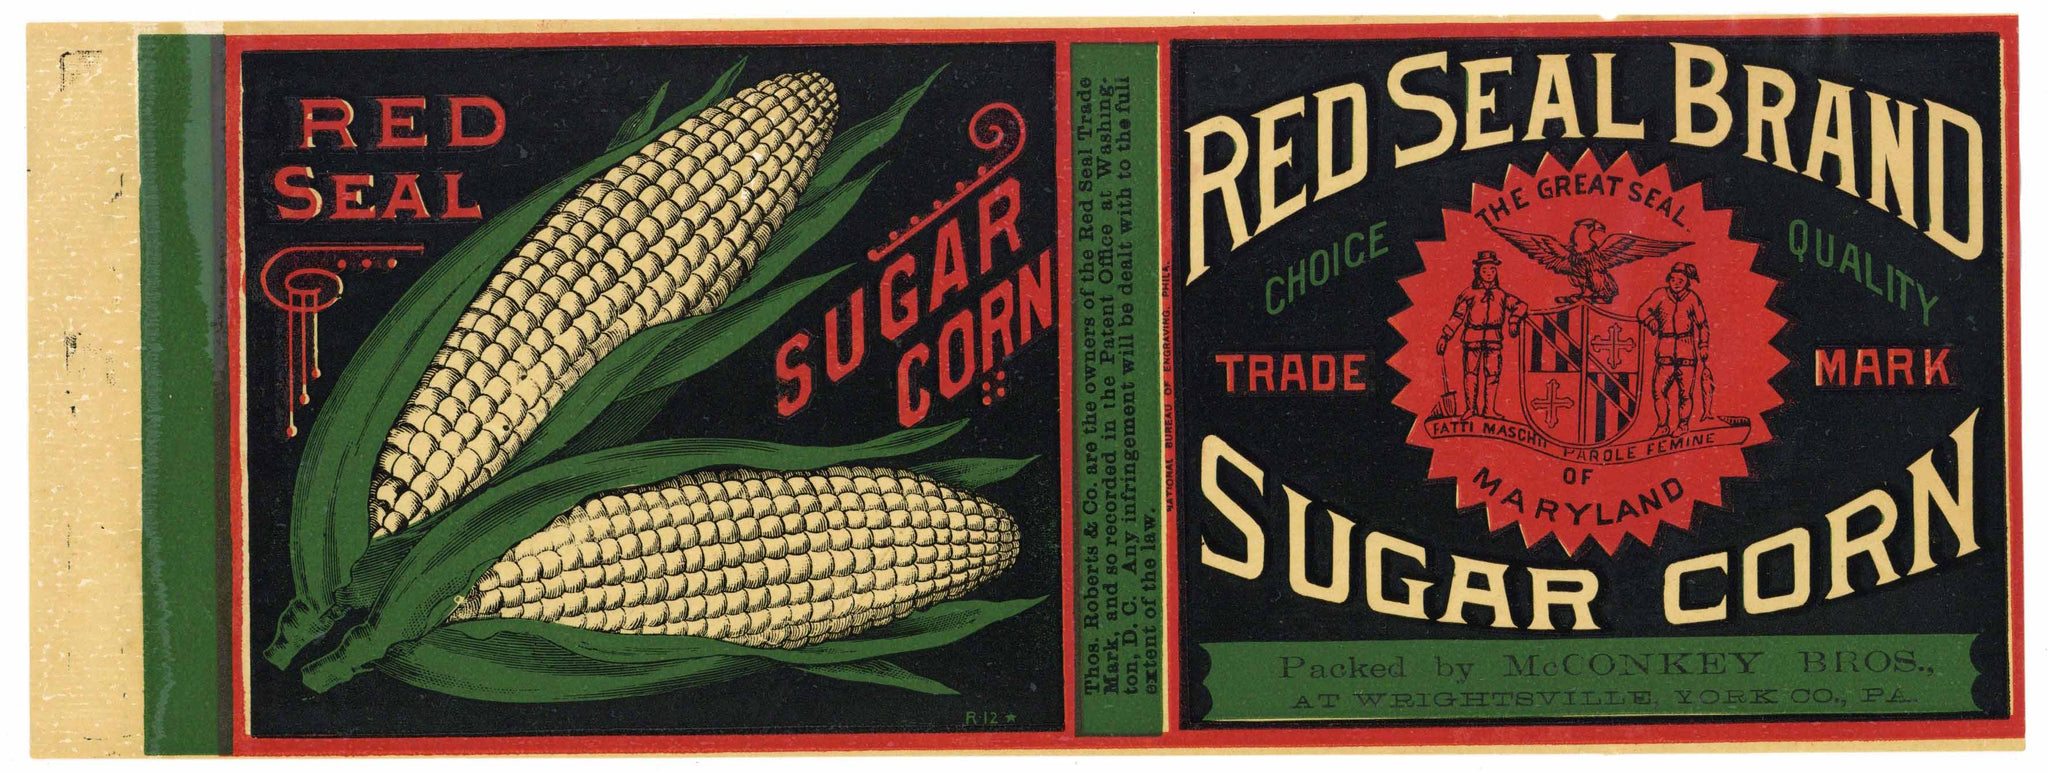 Red Seal Brand Vintage Maryland Sugar Corn Can Label